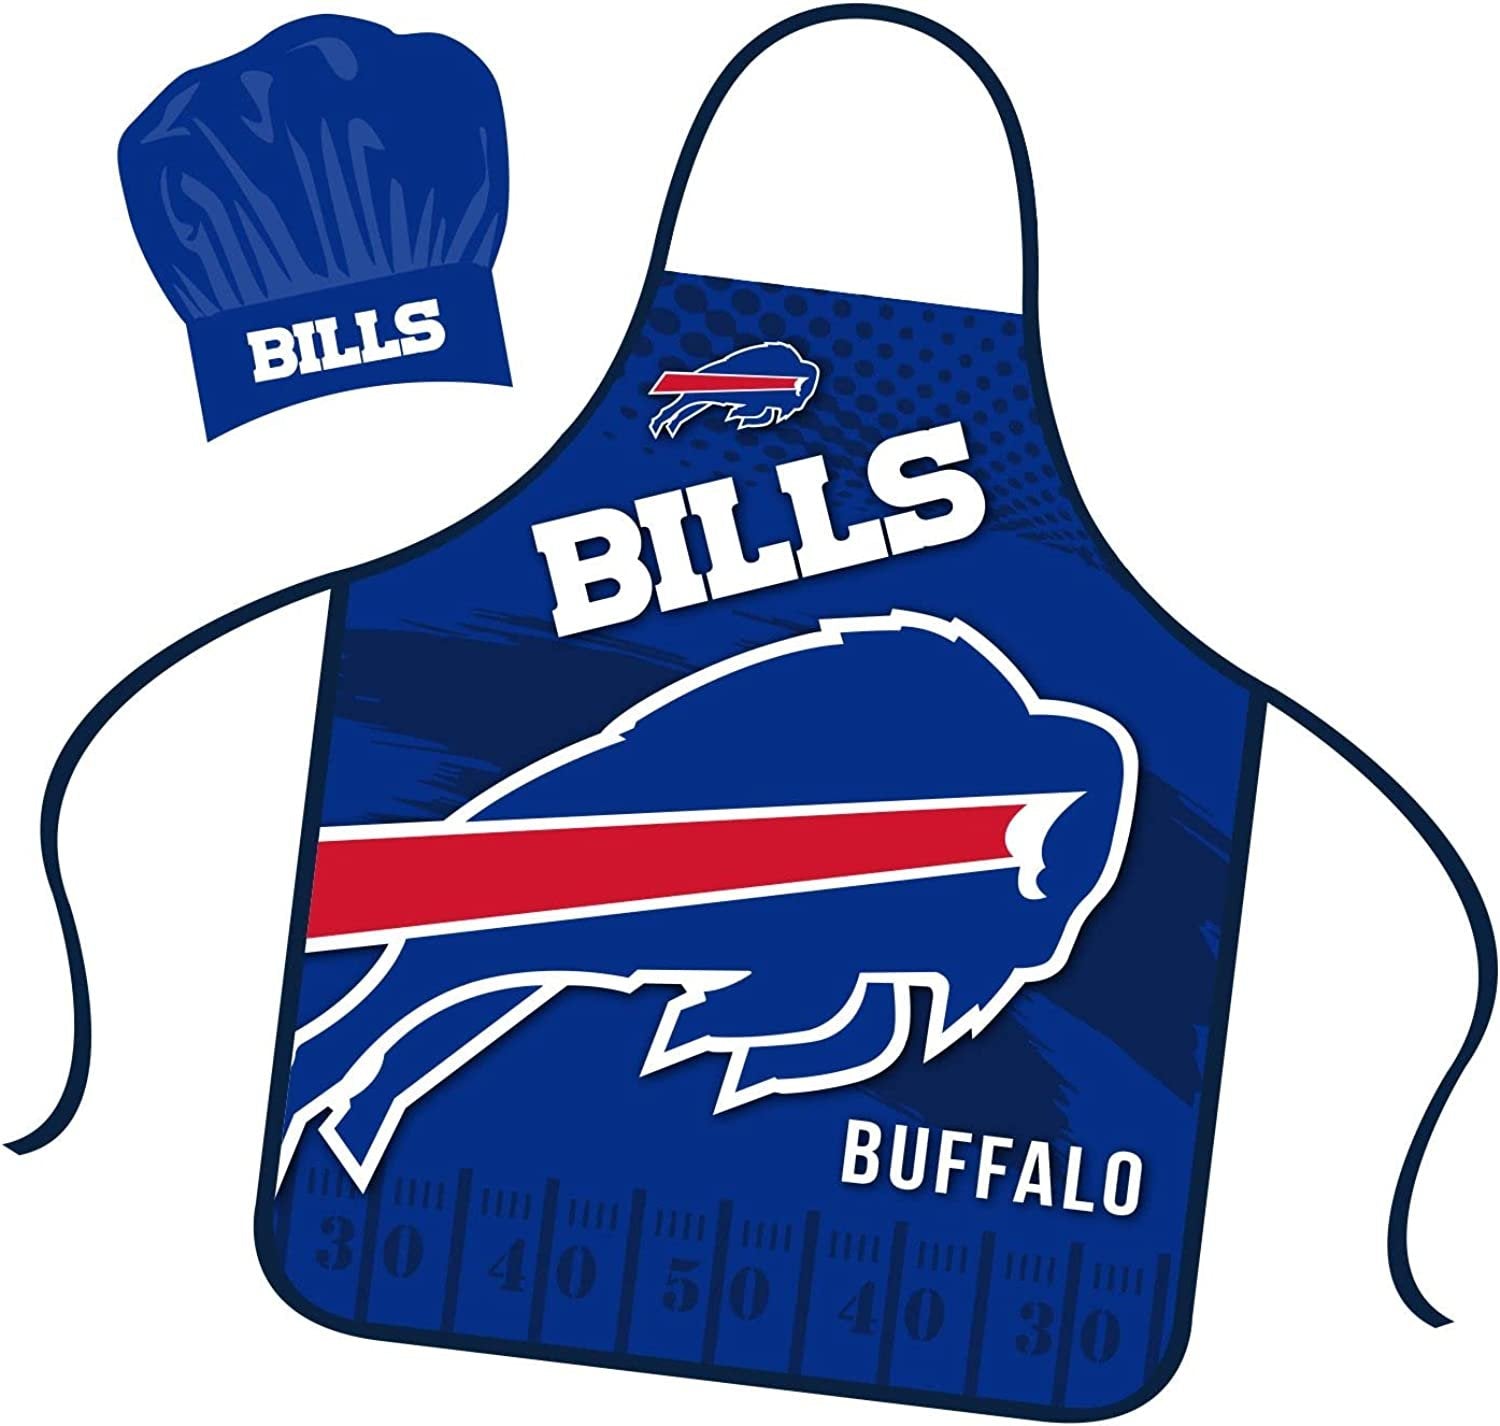 Buffalo Bills Apron Chef Hat Set Full Color Universal Size Tie Back Grilling Tailgate BBQ Cooking Host